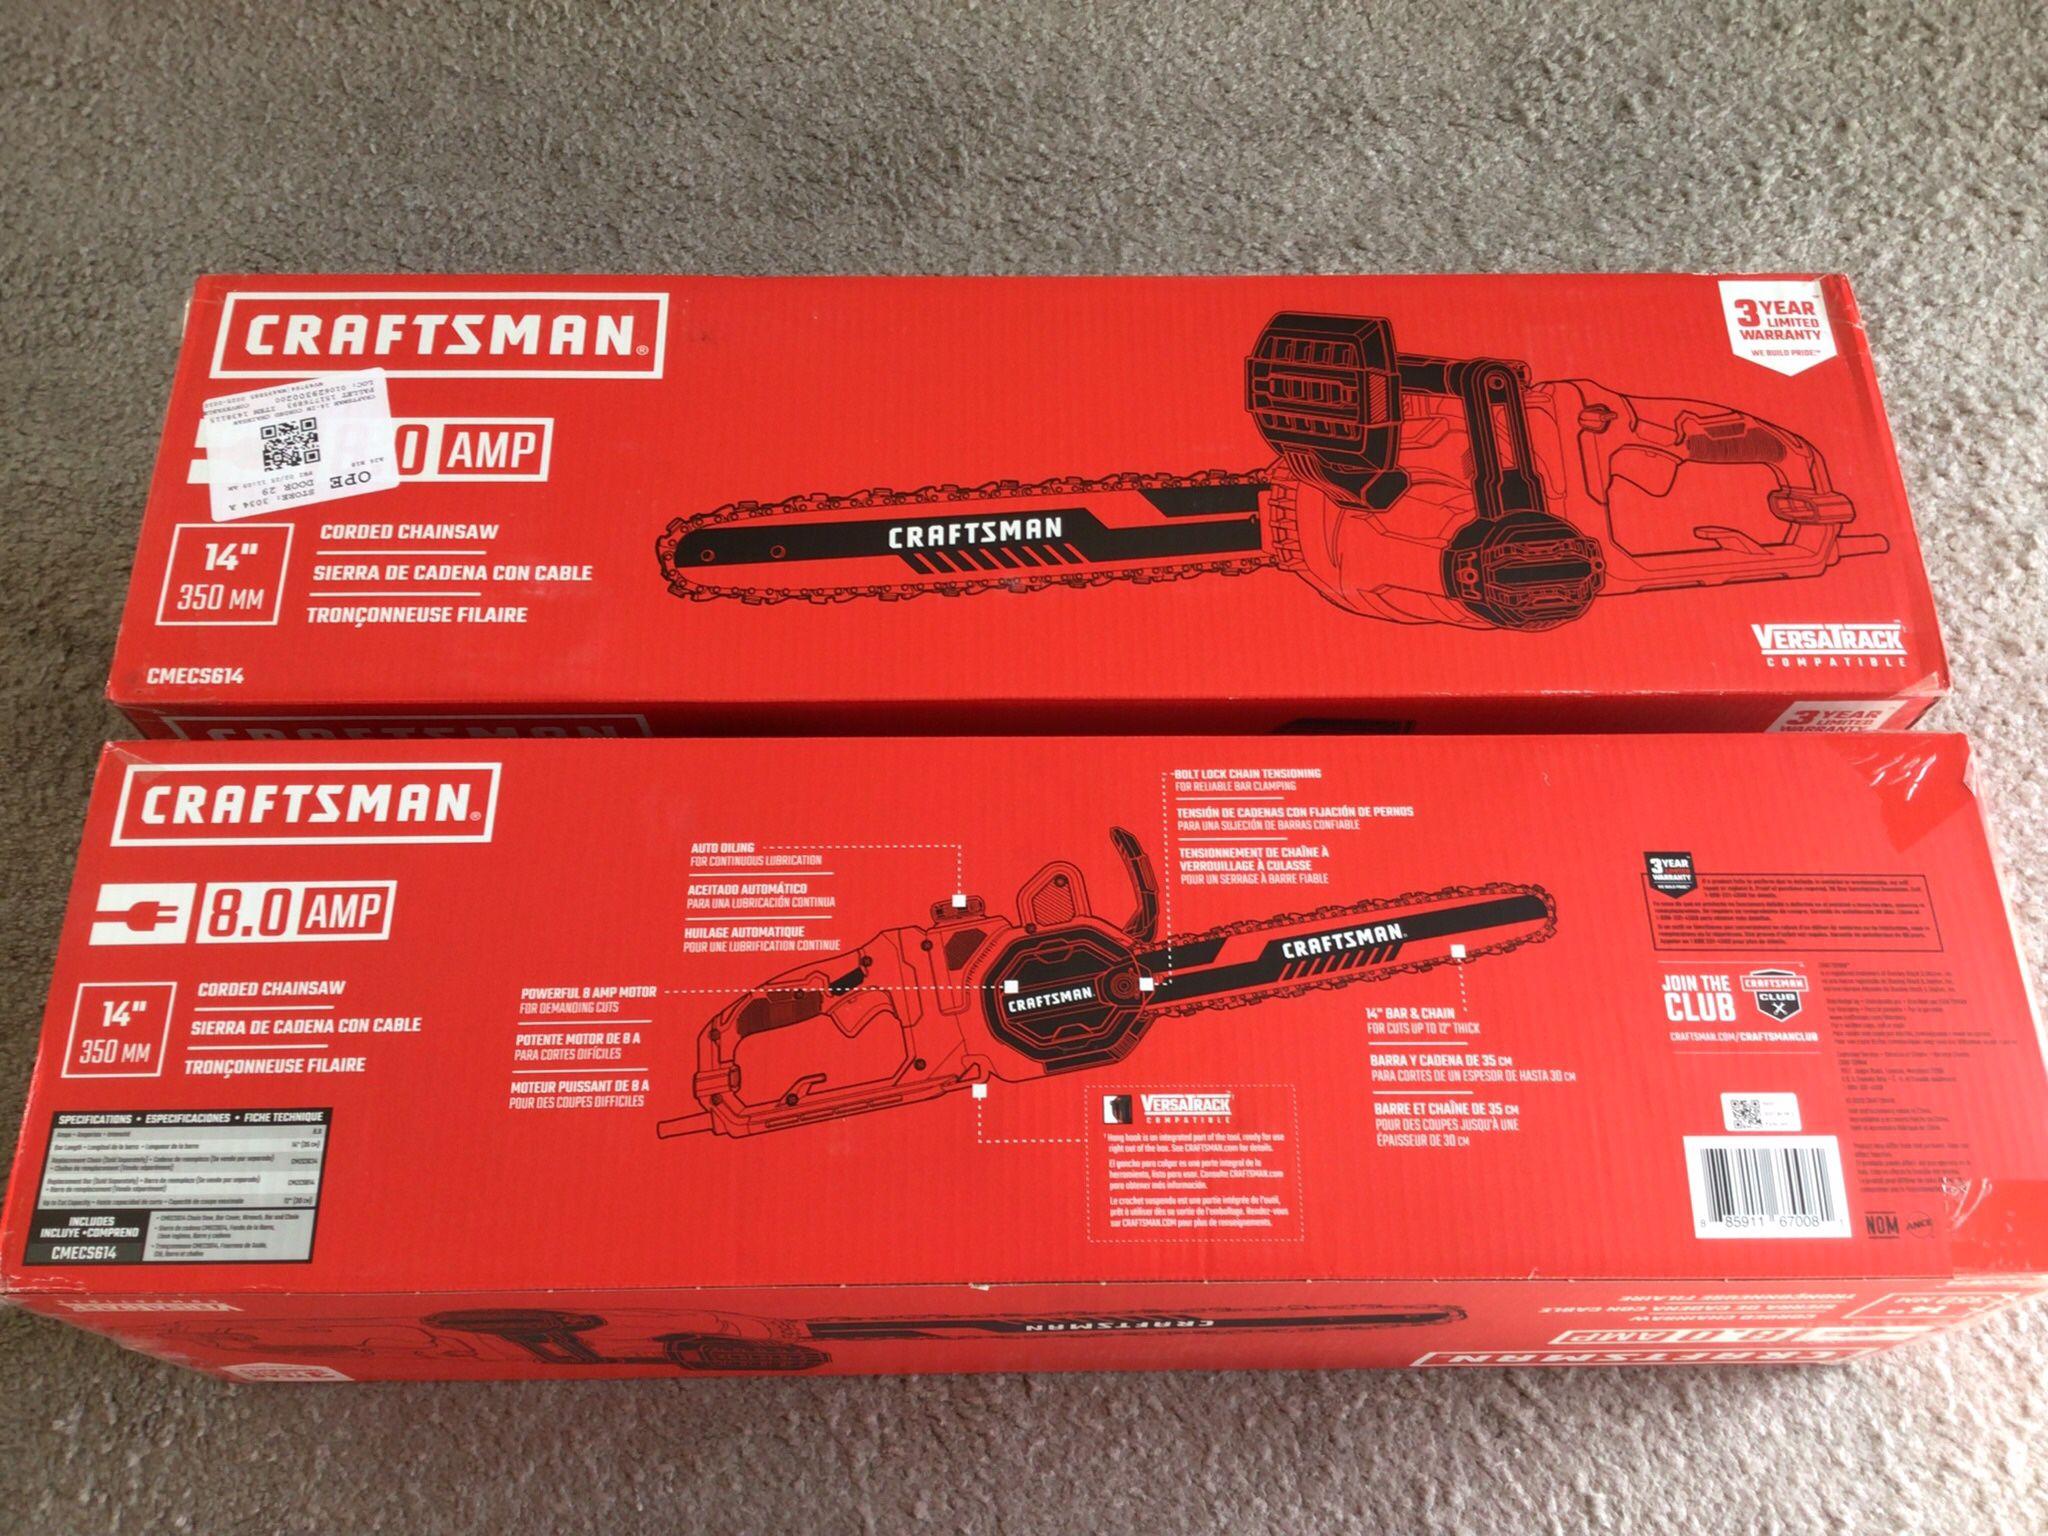 NEW CRAFTSMAN 14 INCH CORDED CHAINSAW $50